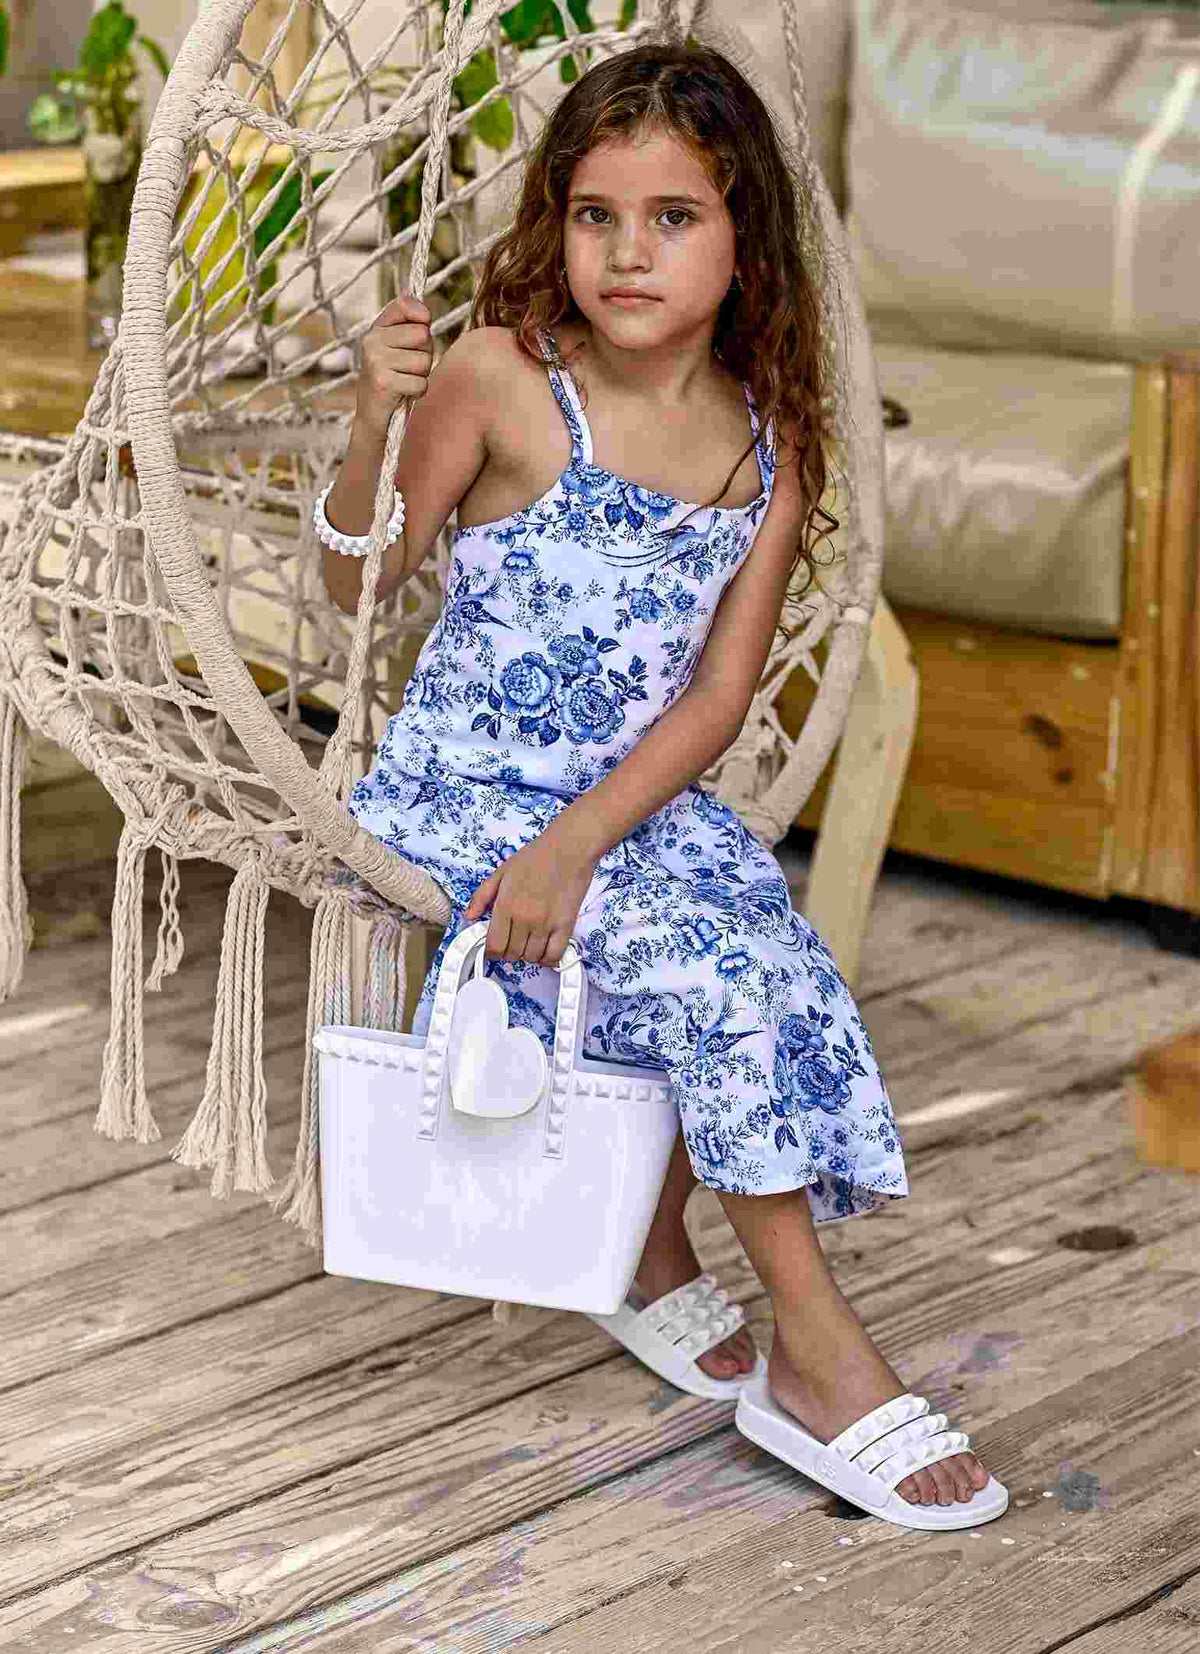 Minicarmensol White franco kids shoes with mini micro tote, jelly kids bracelet for perfect outfit.